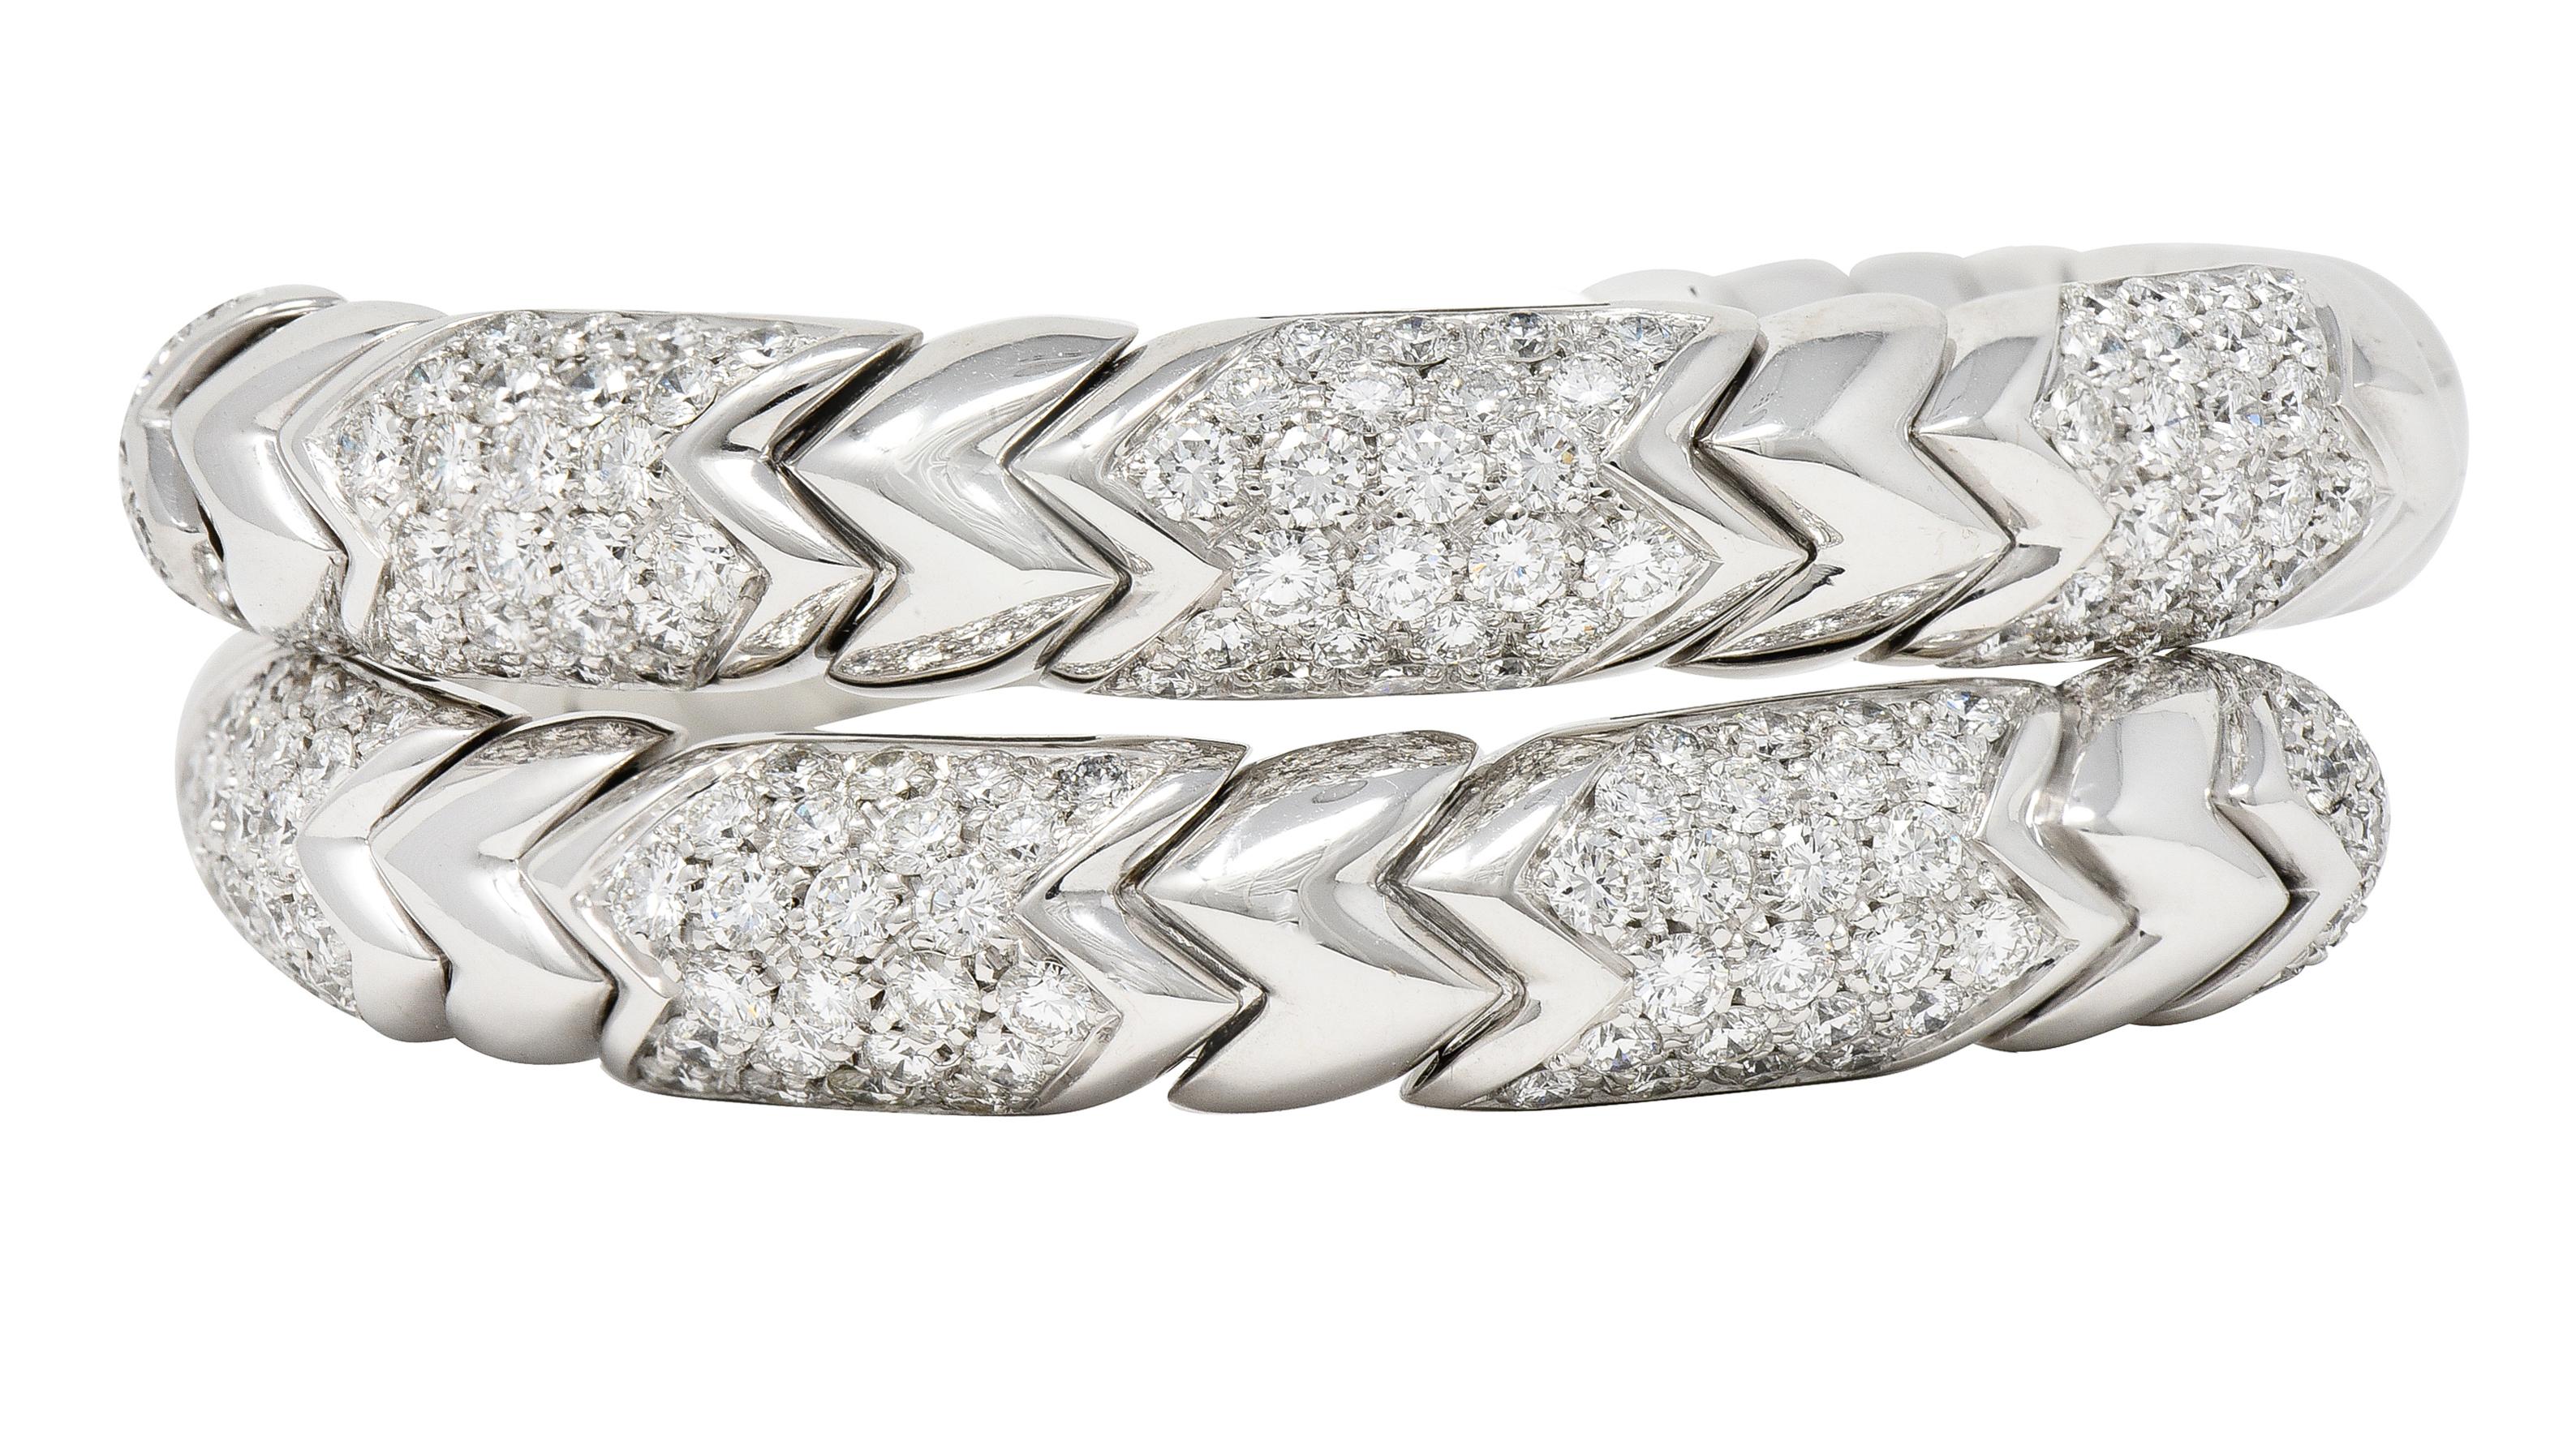 Designed as a flexible tubogas style wrap bracelet comprised of 'Spiga' motif zigzag segments. Featuring rounded terminals with round brilliant cut diamonds in pavéd segments. Weighing approximately 6.50 carats total - F/G color with VS clarity.